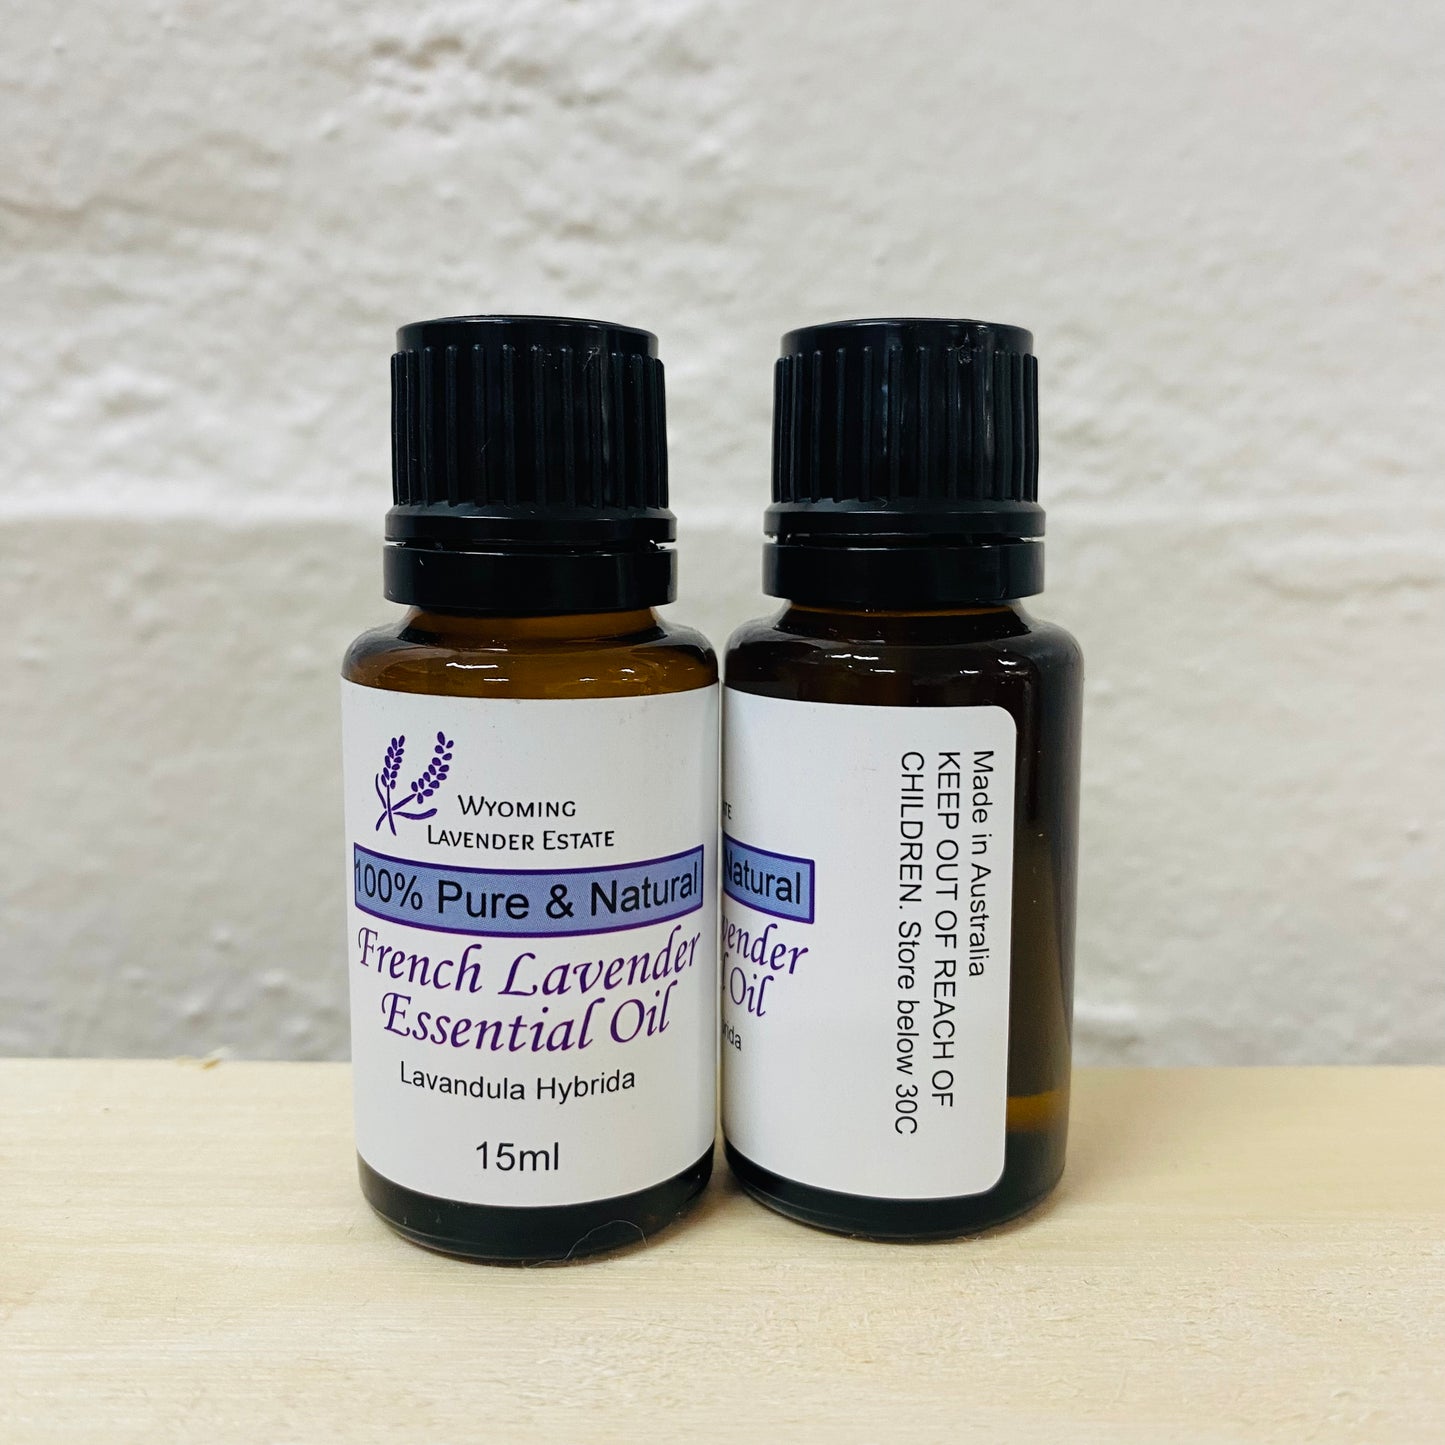 French Lavender Essential Oil 15ml by Wyoming Lavender